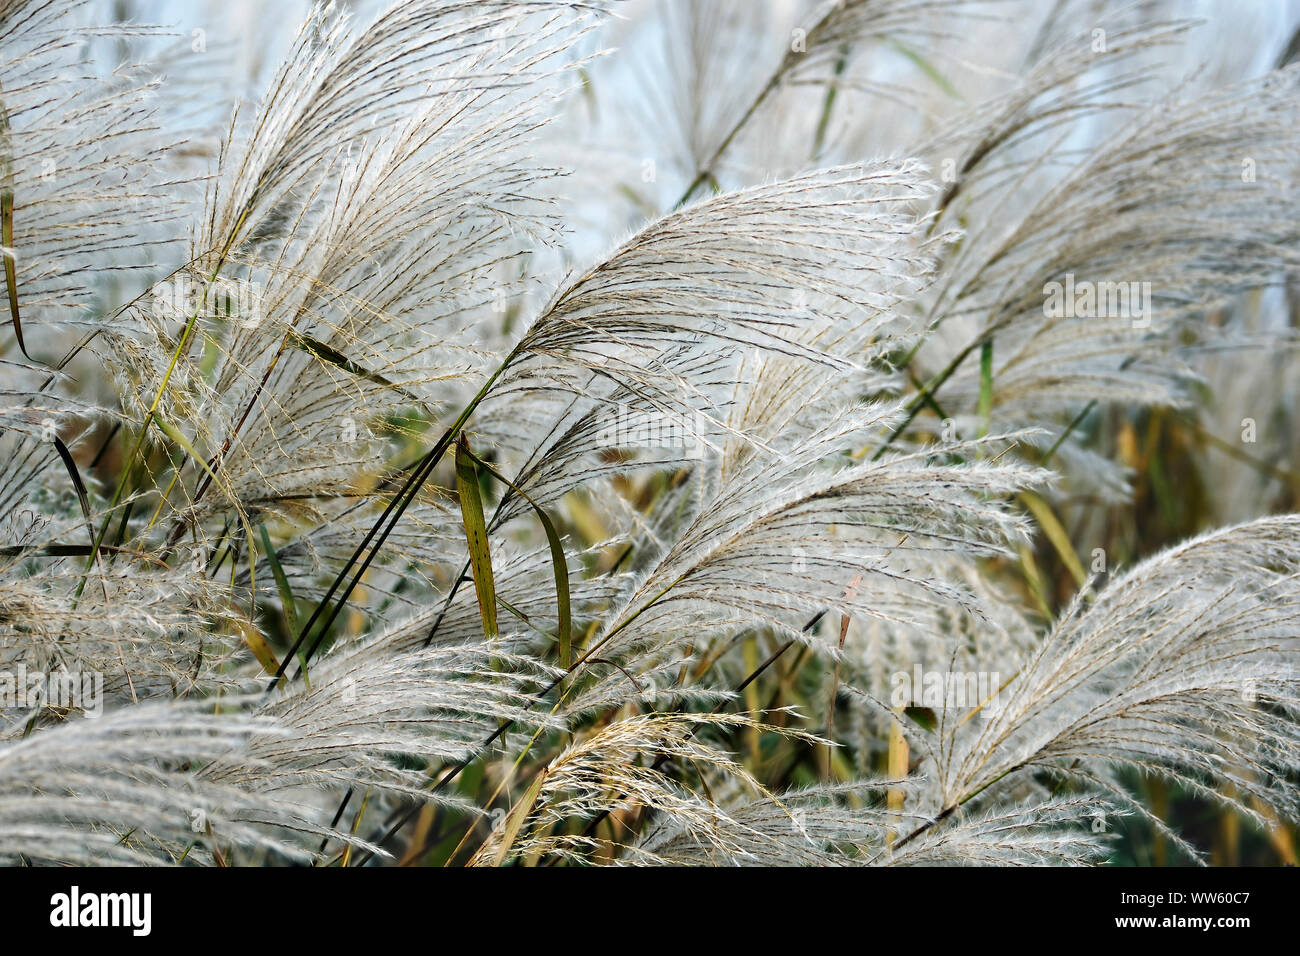 Amur silver grass, Miscanthus sacchariflorus, Silver coloured grasses growing outdoor. Stock Photo